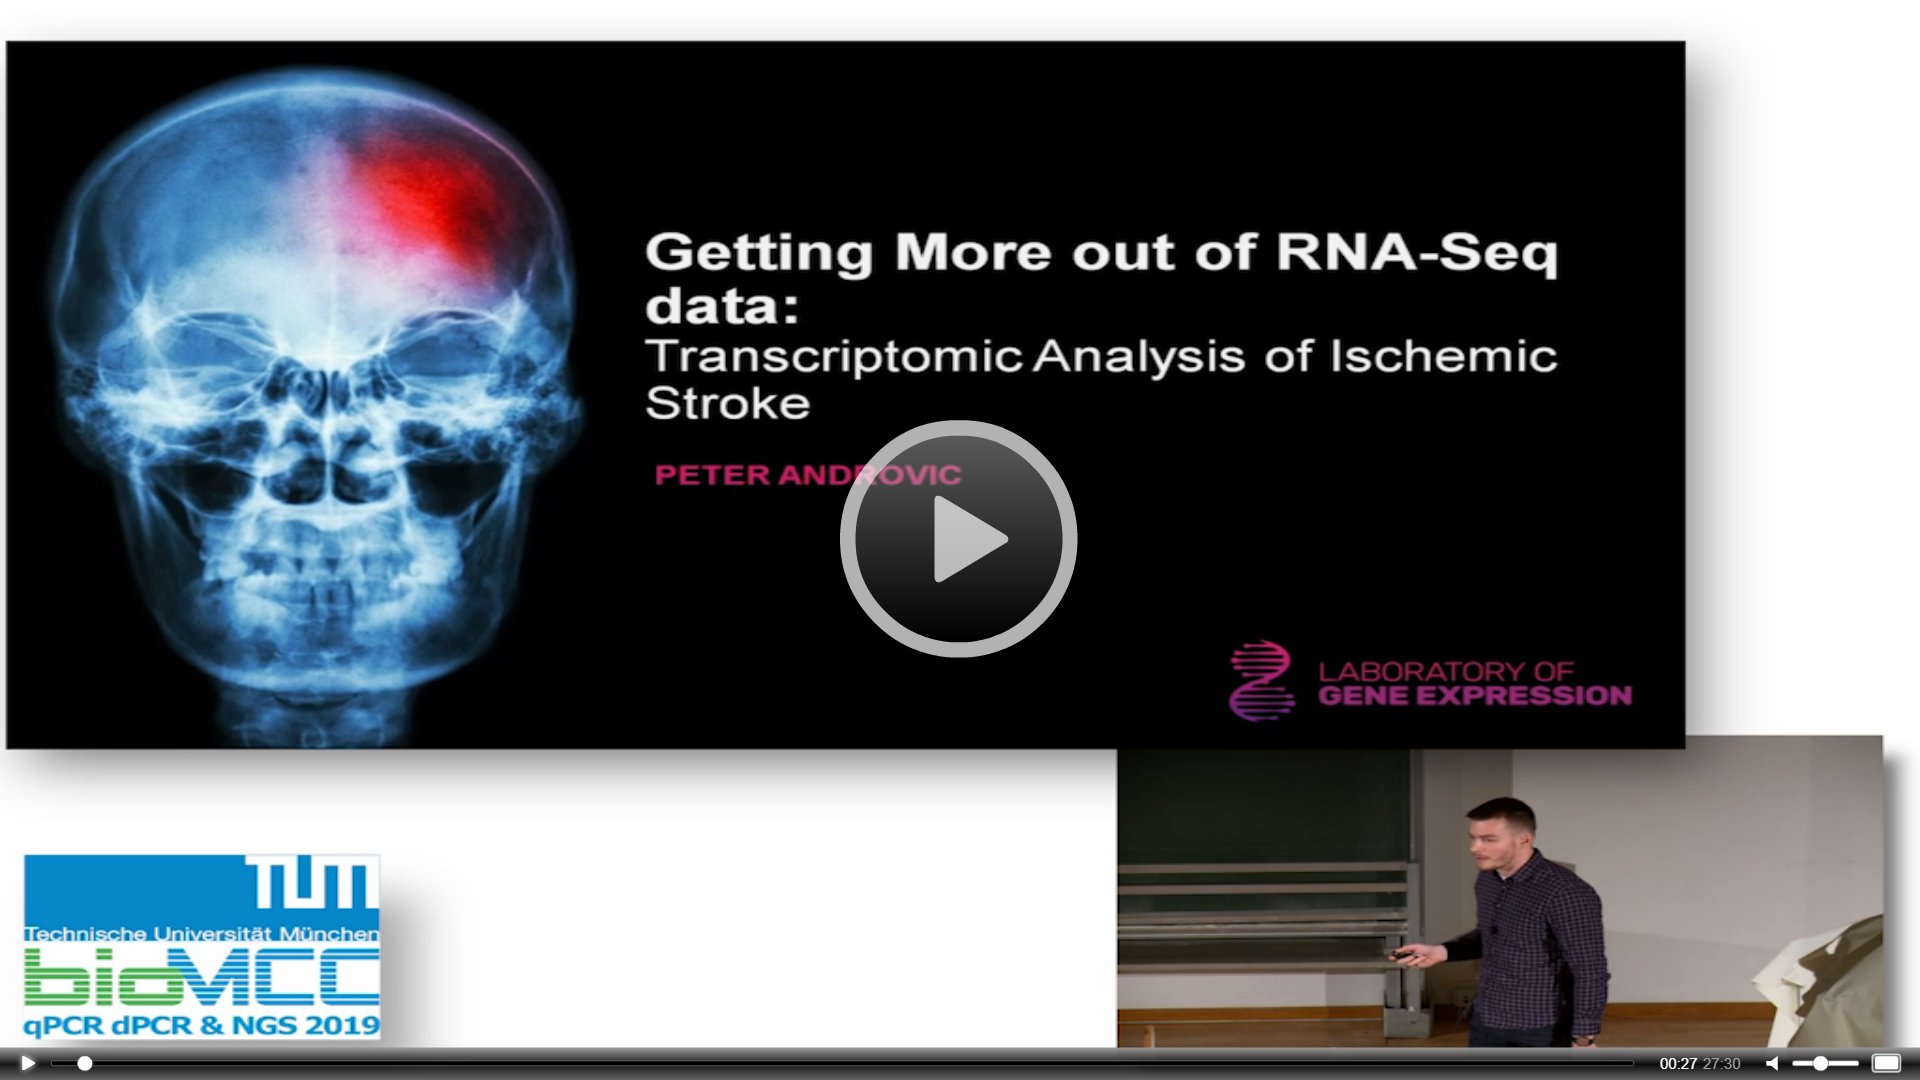 Getting More out of RNA-Seq Data: Transcriptomic Analysis of Ischemic Stroke